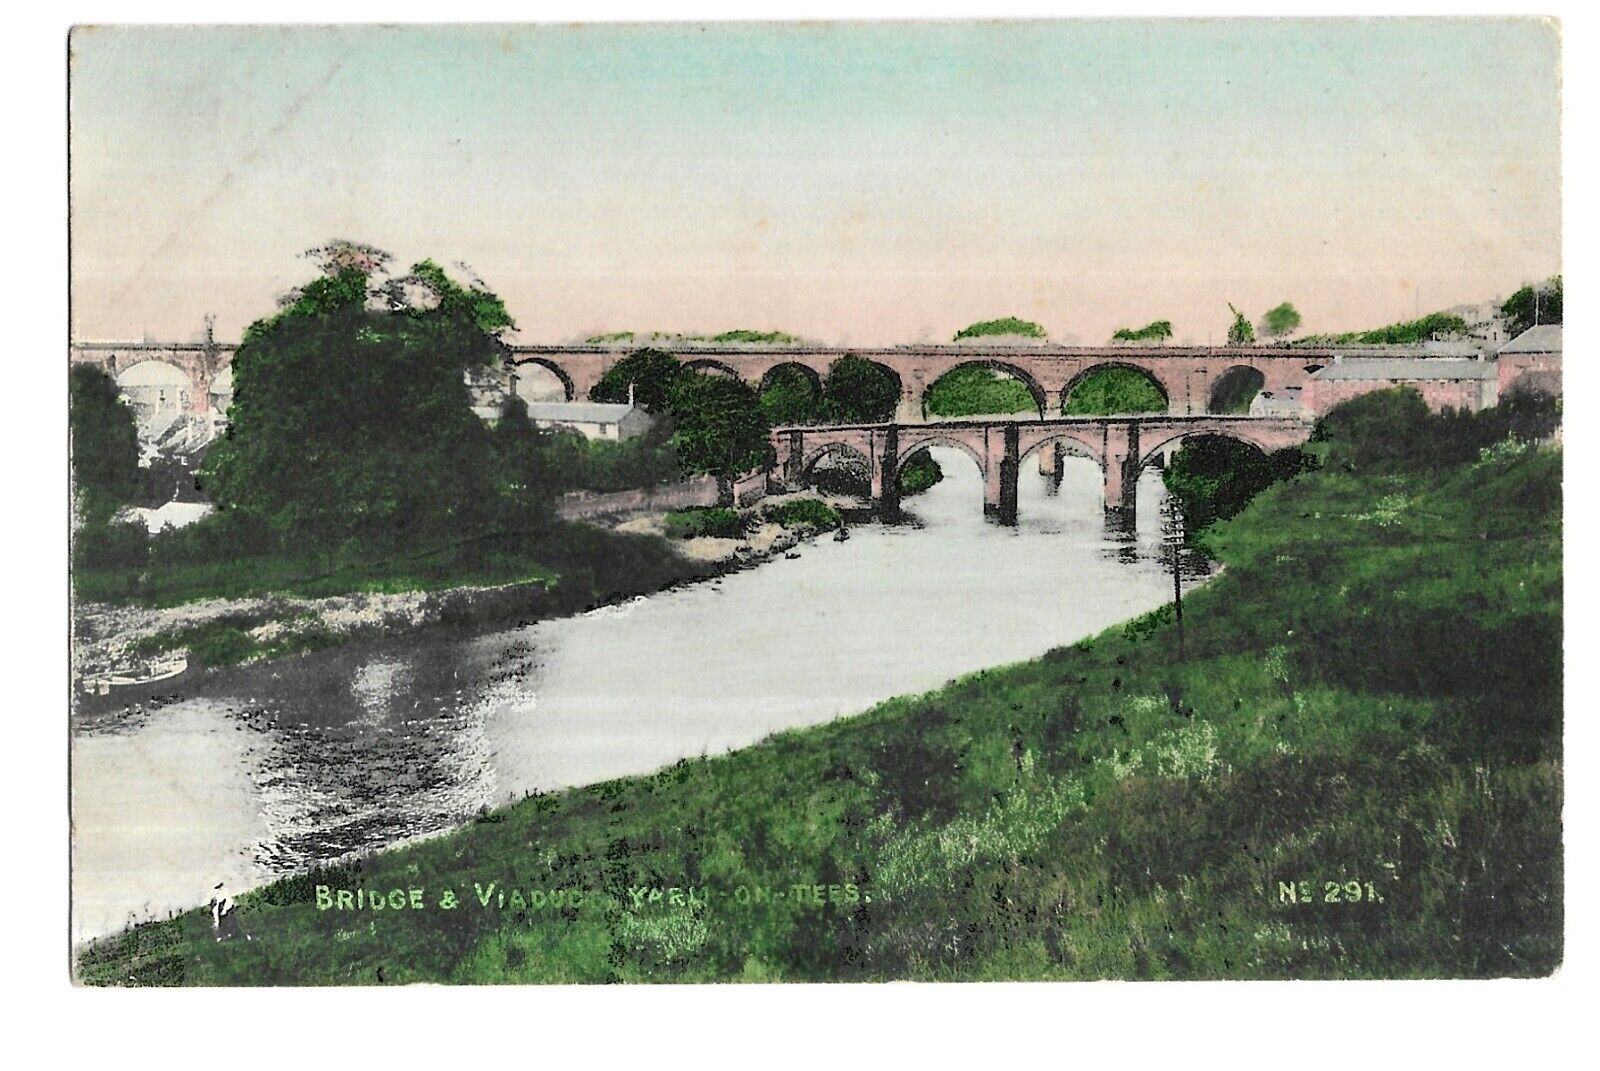 House Clearance - Yorkshire. Bridge & Viaduct, Yarm on Tees. Published by Brittain & Wright.